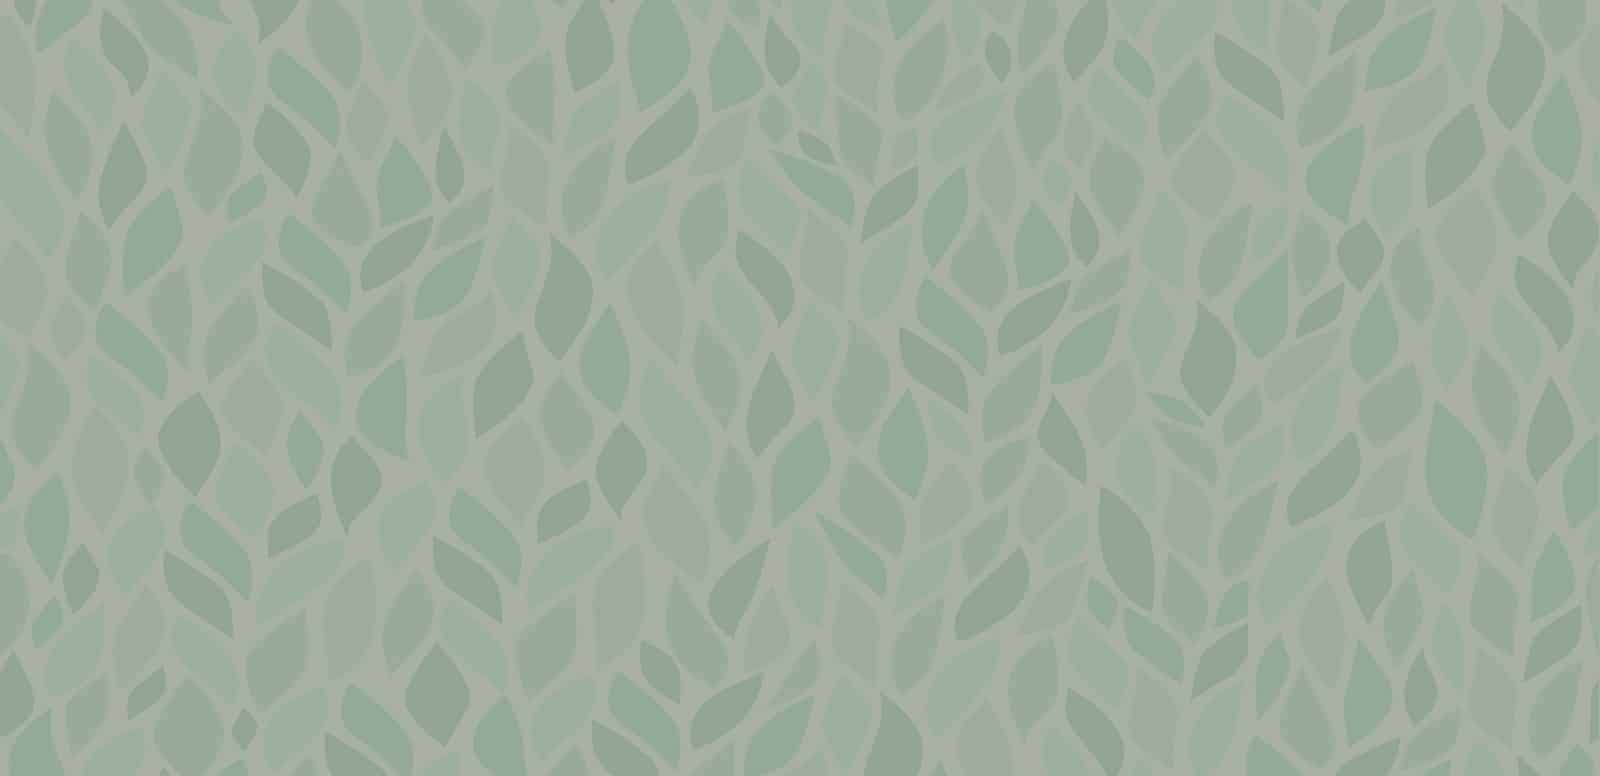 A leafy patterned background image in green - Dentist